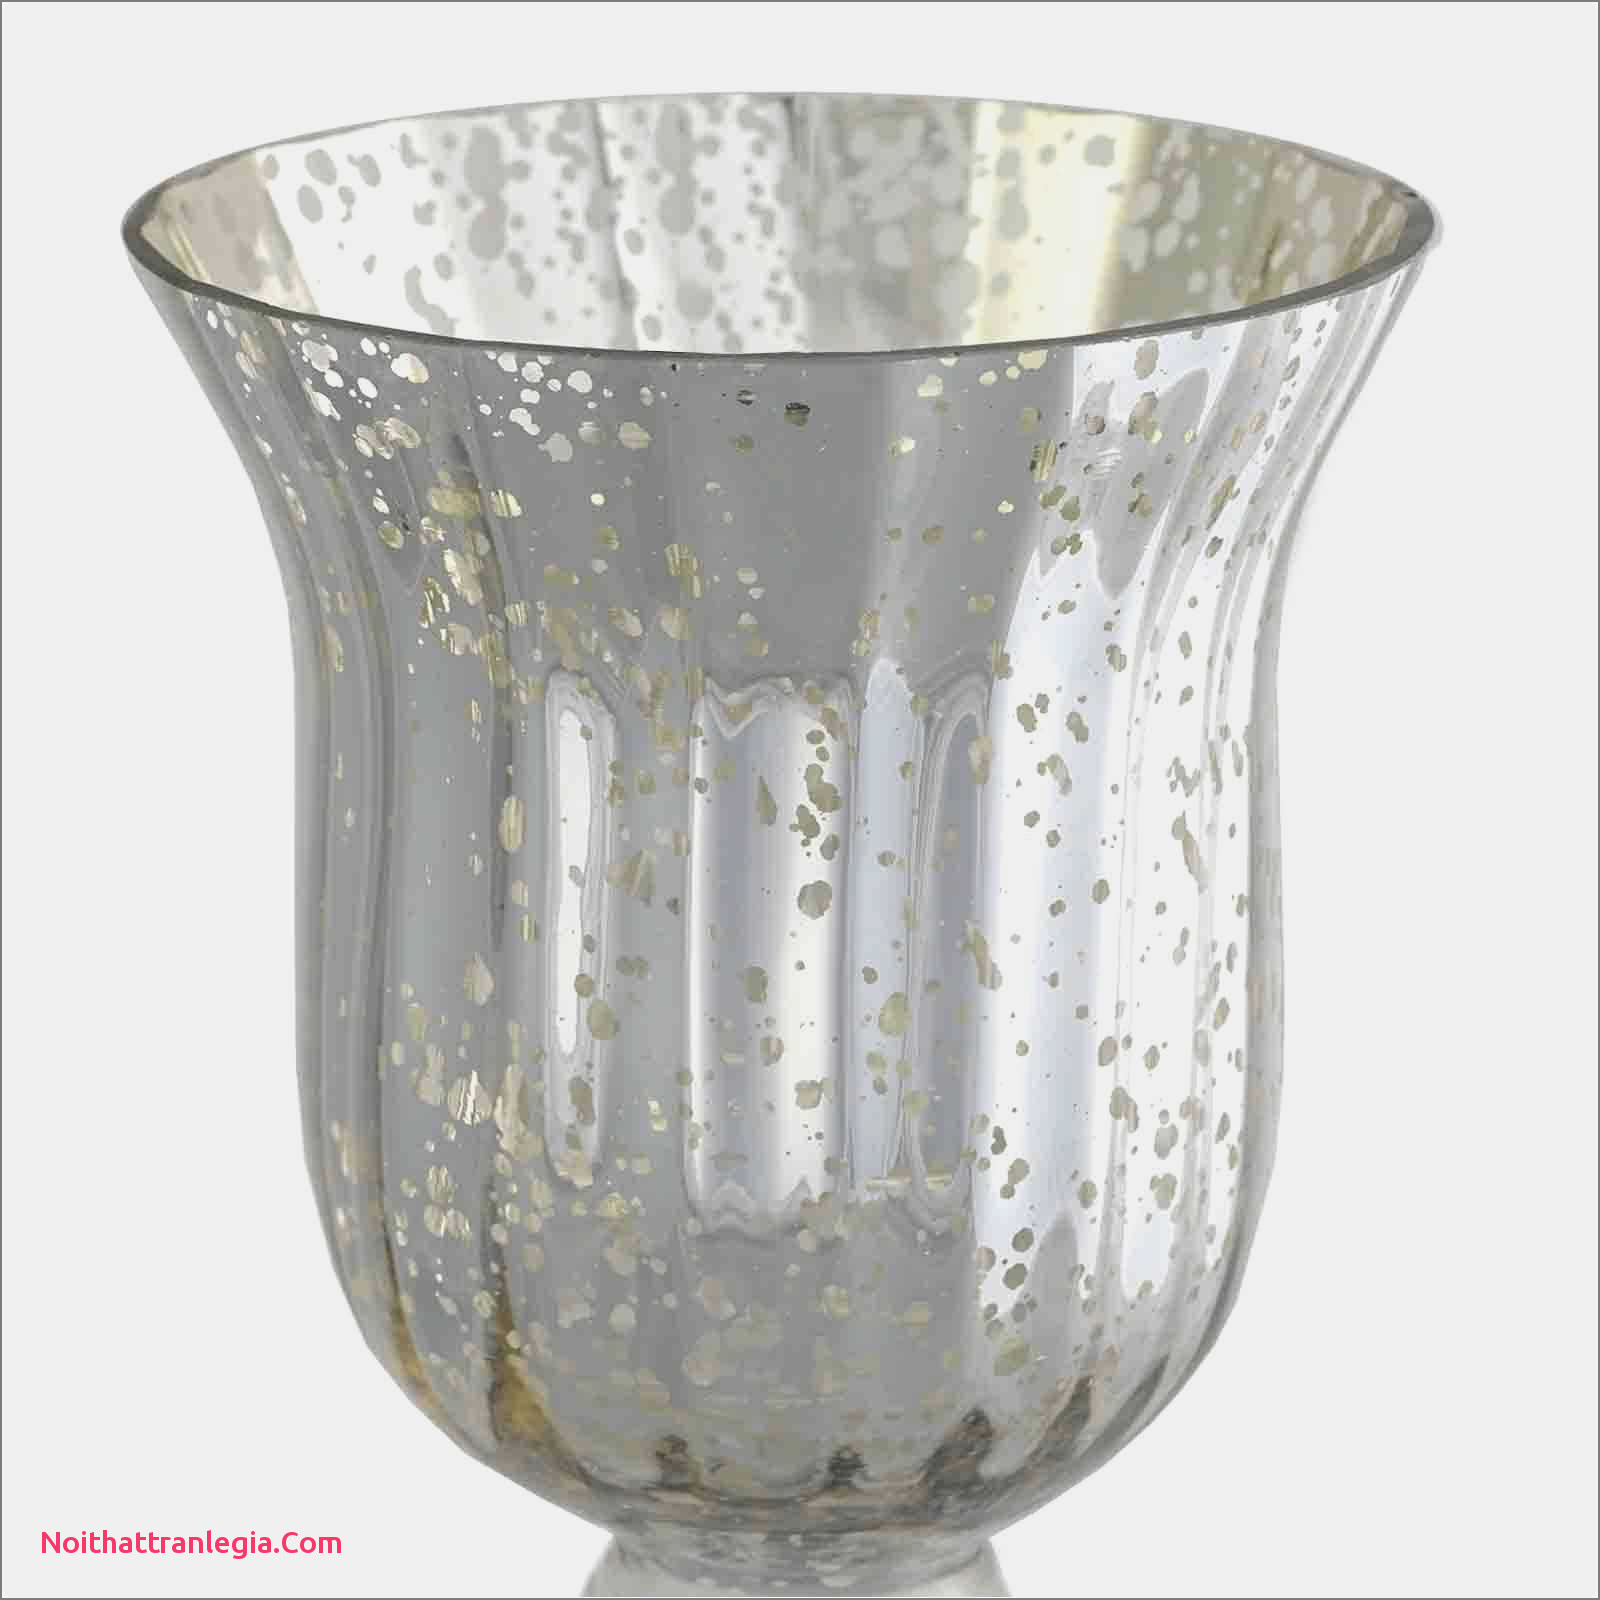 30 Perfect Cut Glass Vases wholesale 2024 free download cut glass vases wholesale of 20 wedding vases noithattranlegia vases design within wedding guest gift ideas inspirational candles for wedding favors superb pe s5h vases candle vase i